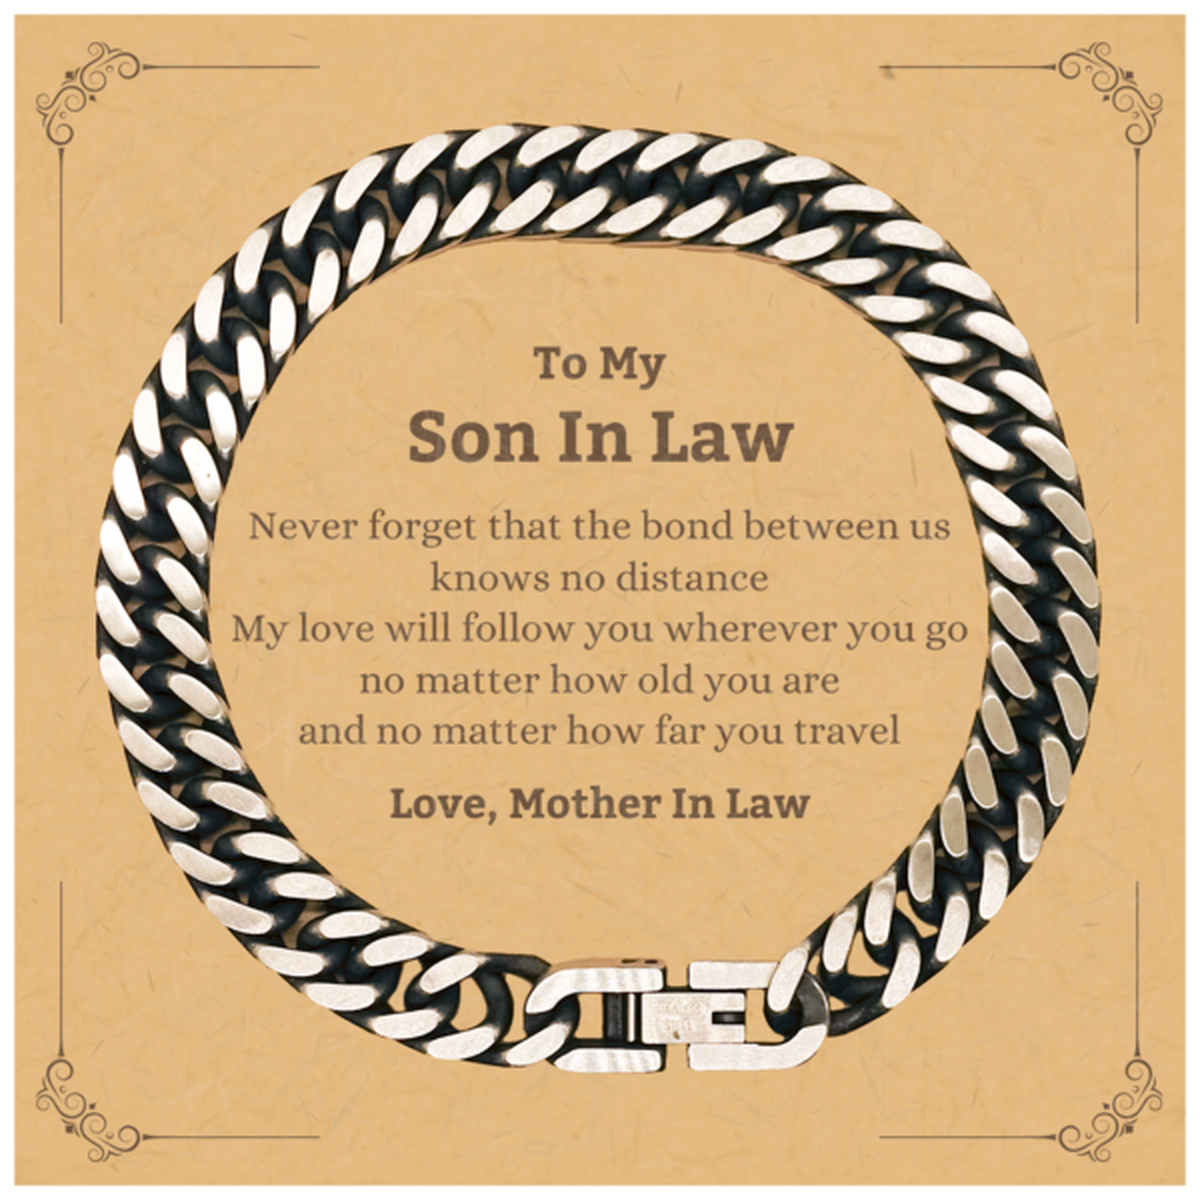 Son In Law Birthday Gifts from Mother In Law, Adjustable Cuban Link Chain Bracelet for Son In Law Christmas Graduation Unique Gifts Son In Law Never forget that the bond between us knows no distance. Love, Mother In Law